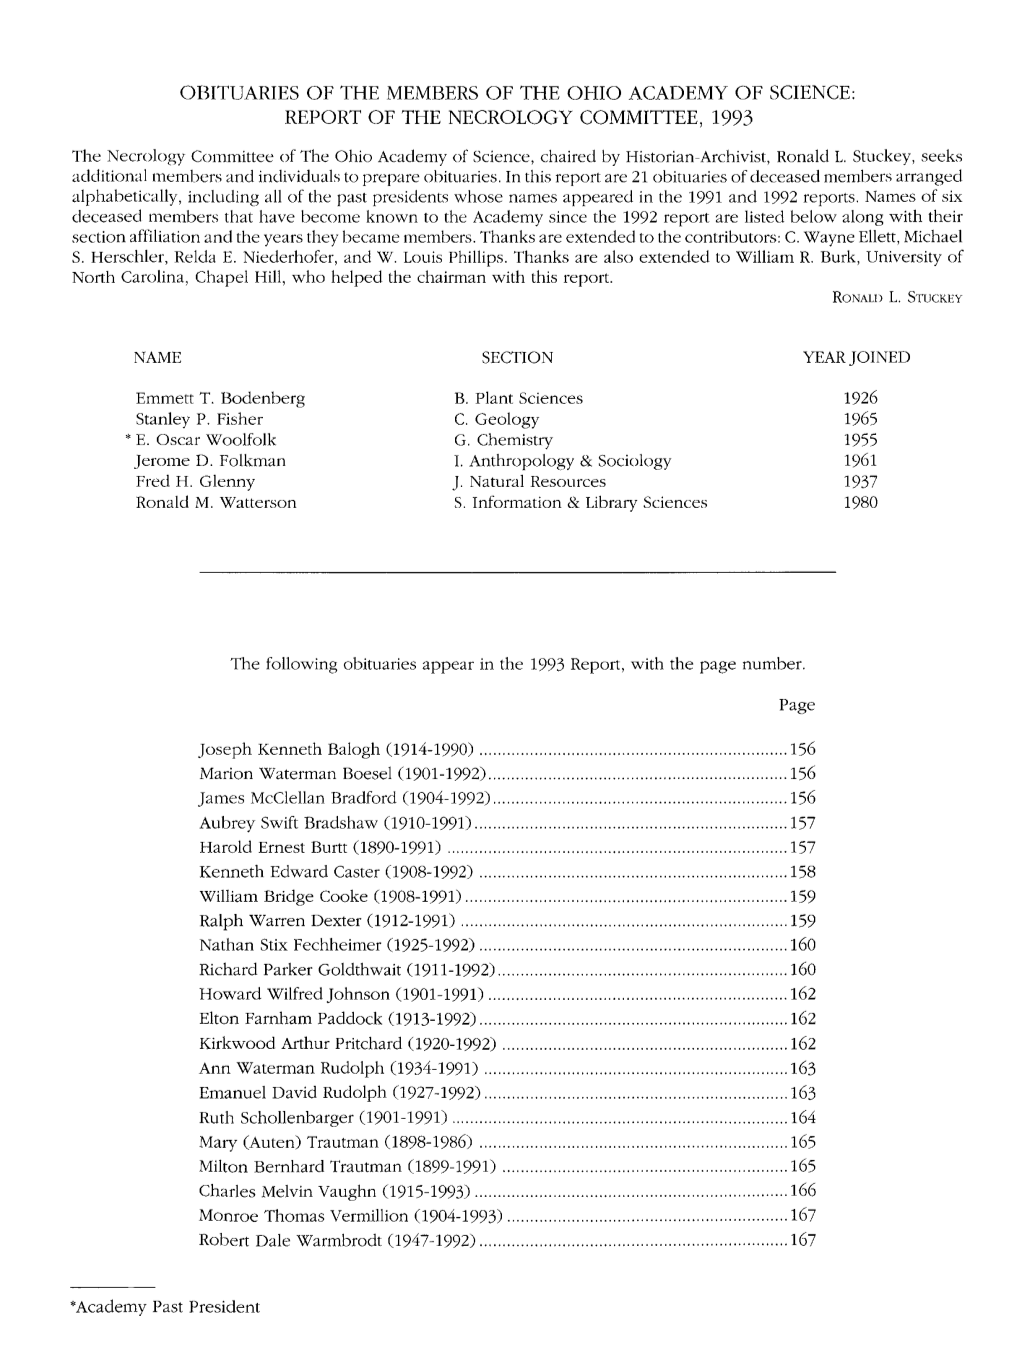 Obituaries of the Members of the Ohio Academy of Science: Report of the Necrology Committee, 1993